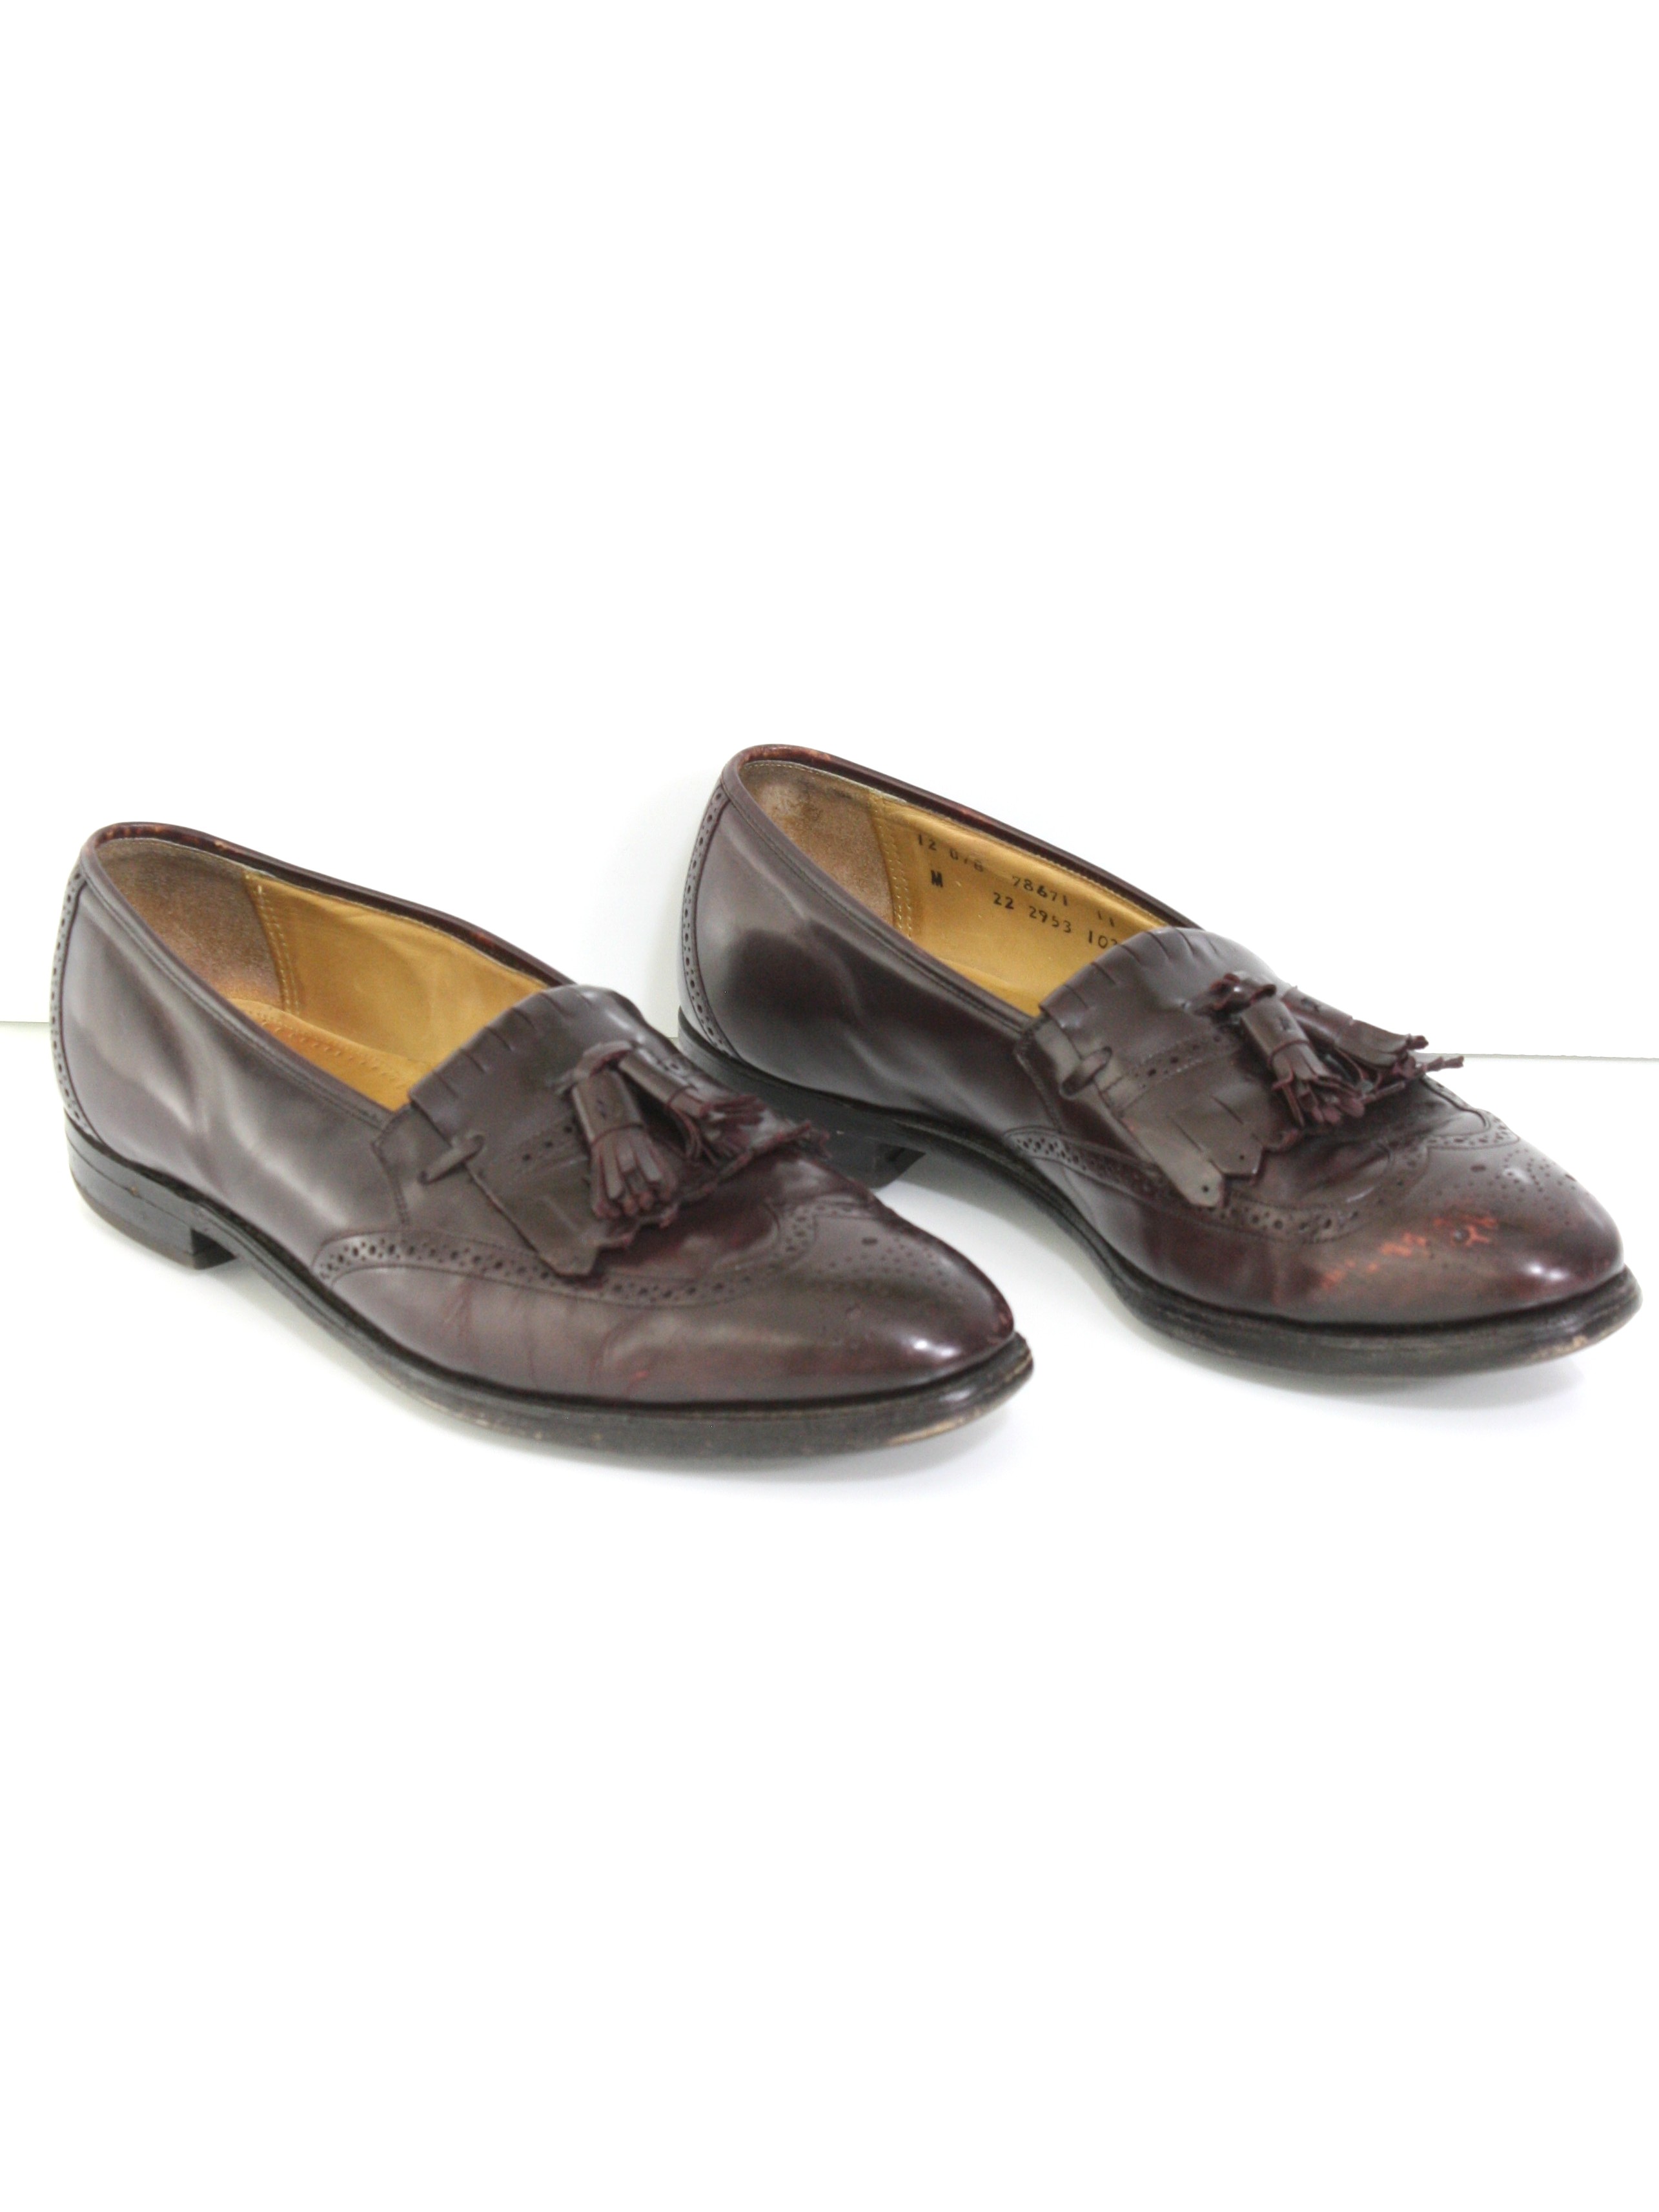 Johnston and Murphy Optima 1990s Vintage Shoes: 90s or newer -Johnston ...